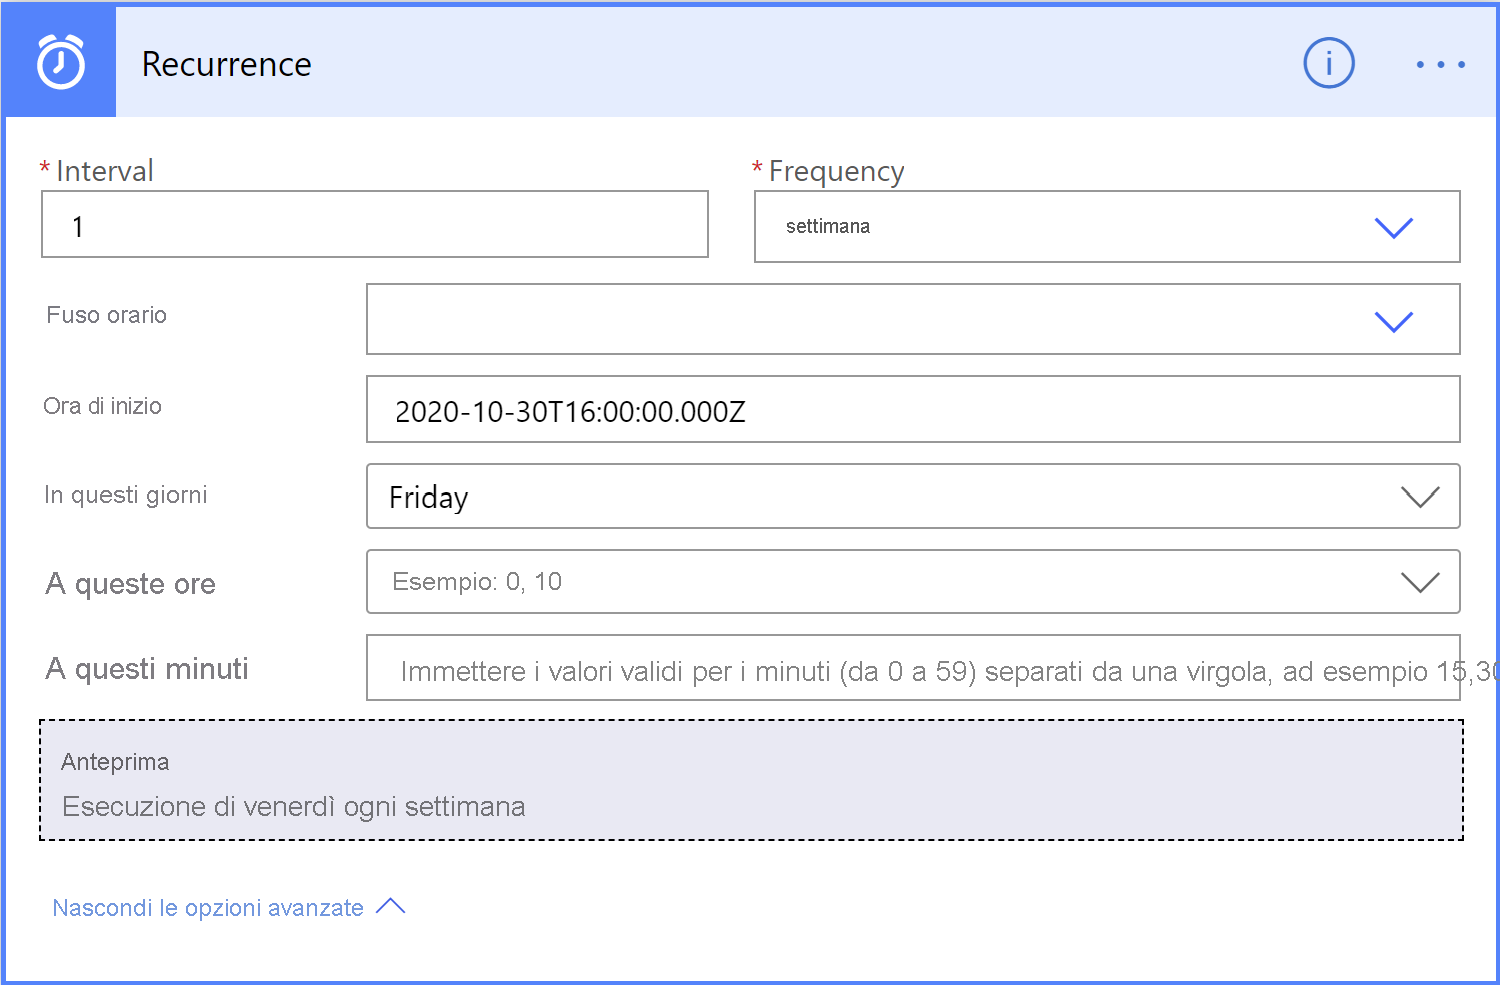 Screenshot showing the recurrence dialog.